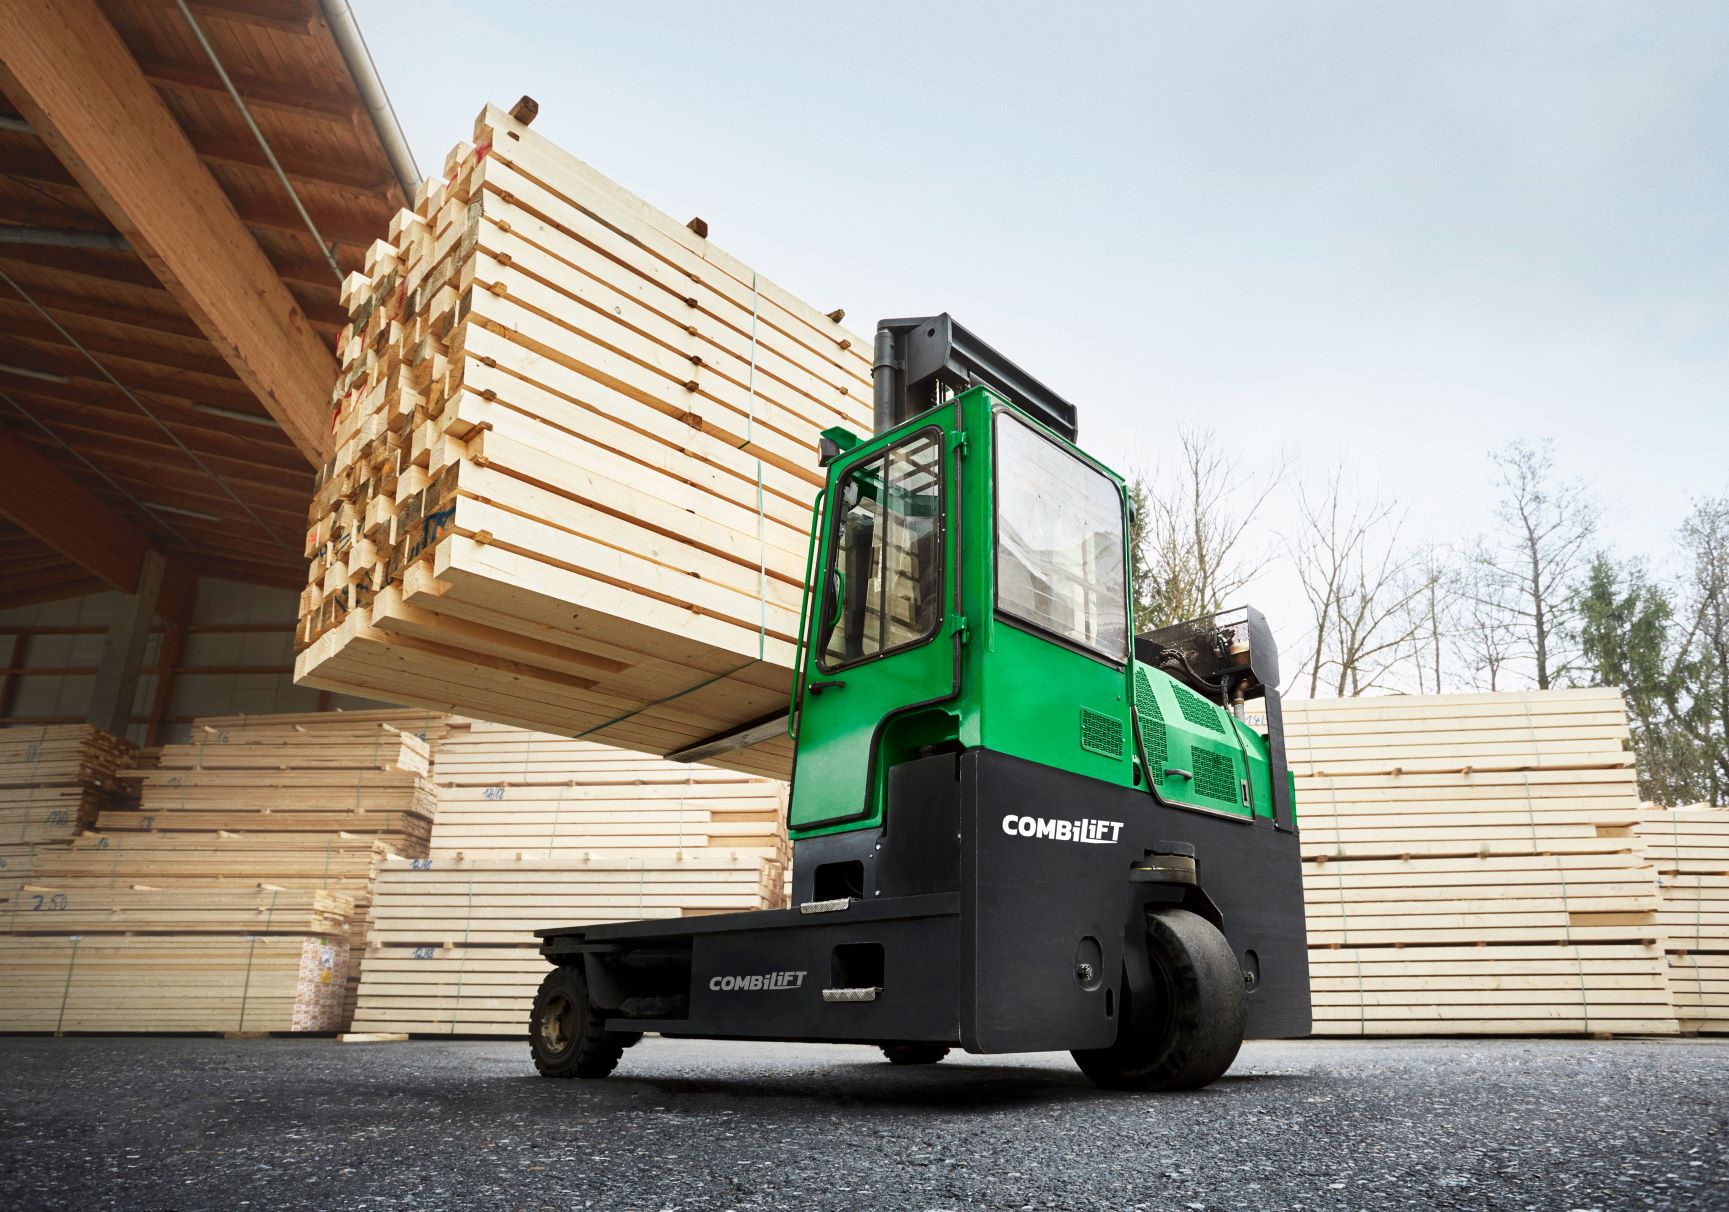 Combilift – Combi C-Series – Multi-directional Forklift – Long Load Handling - Engineered Wood - Lumber Timber - Outdoor